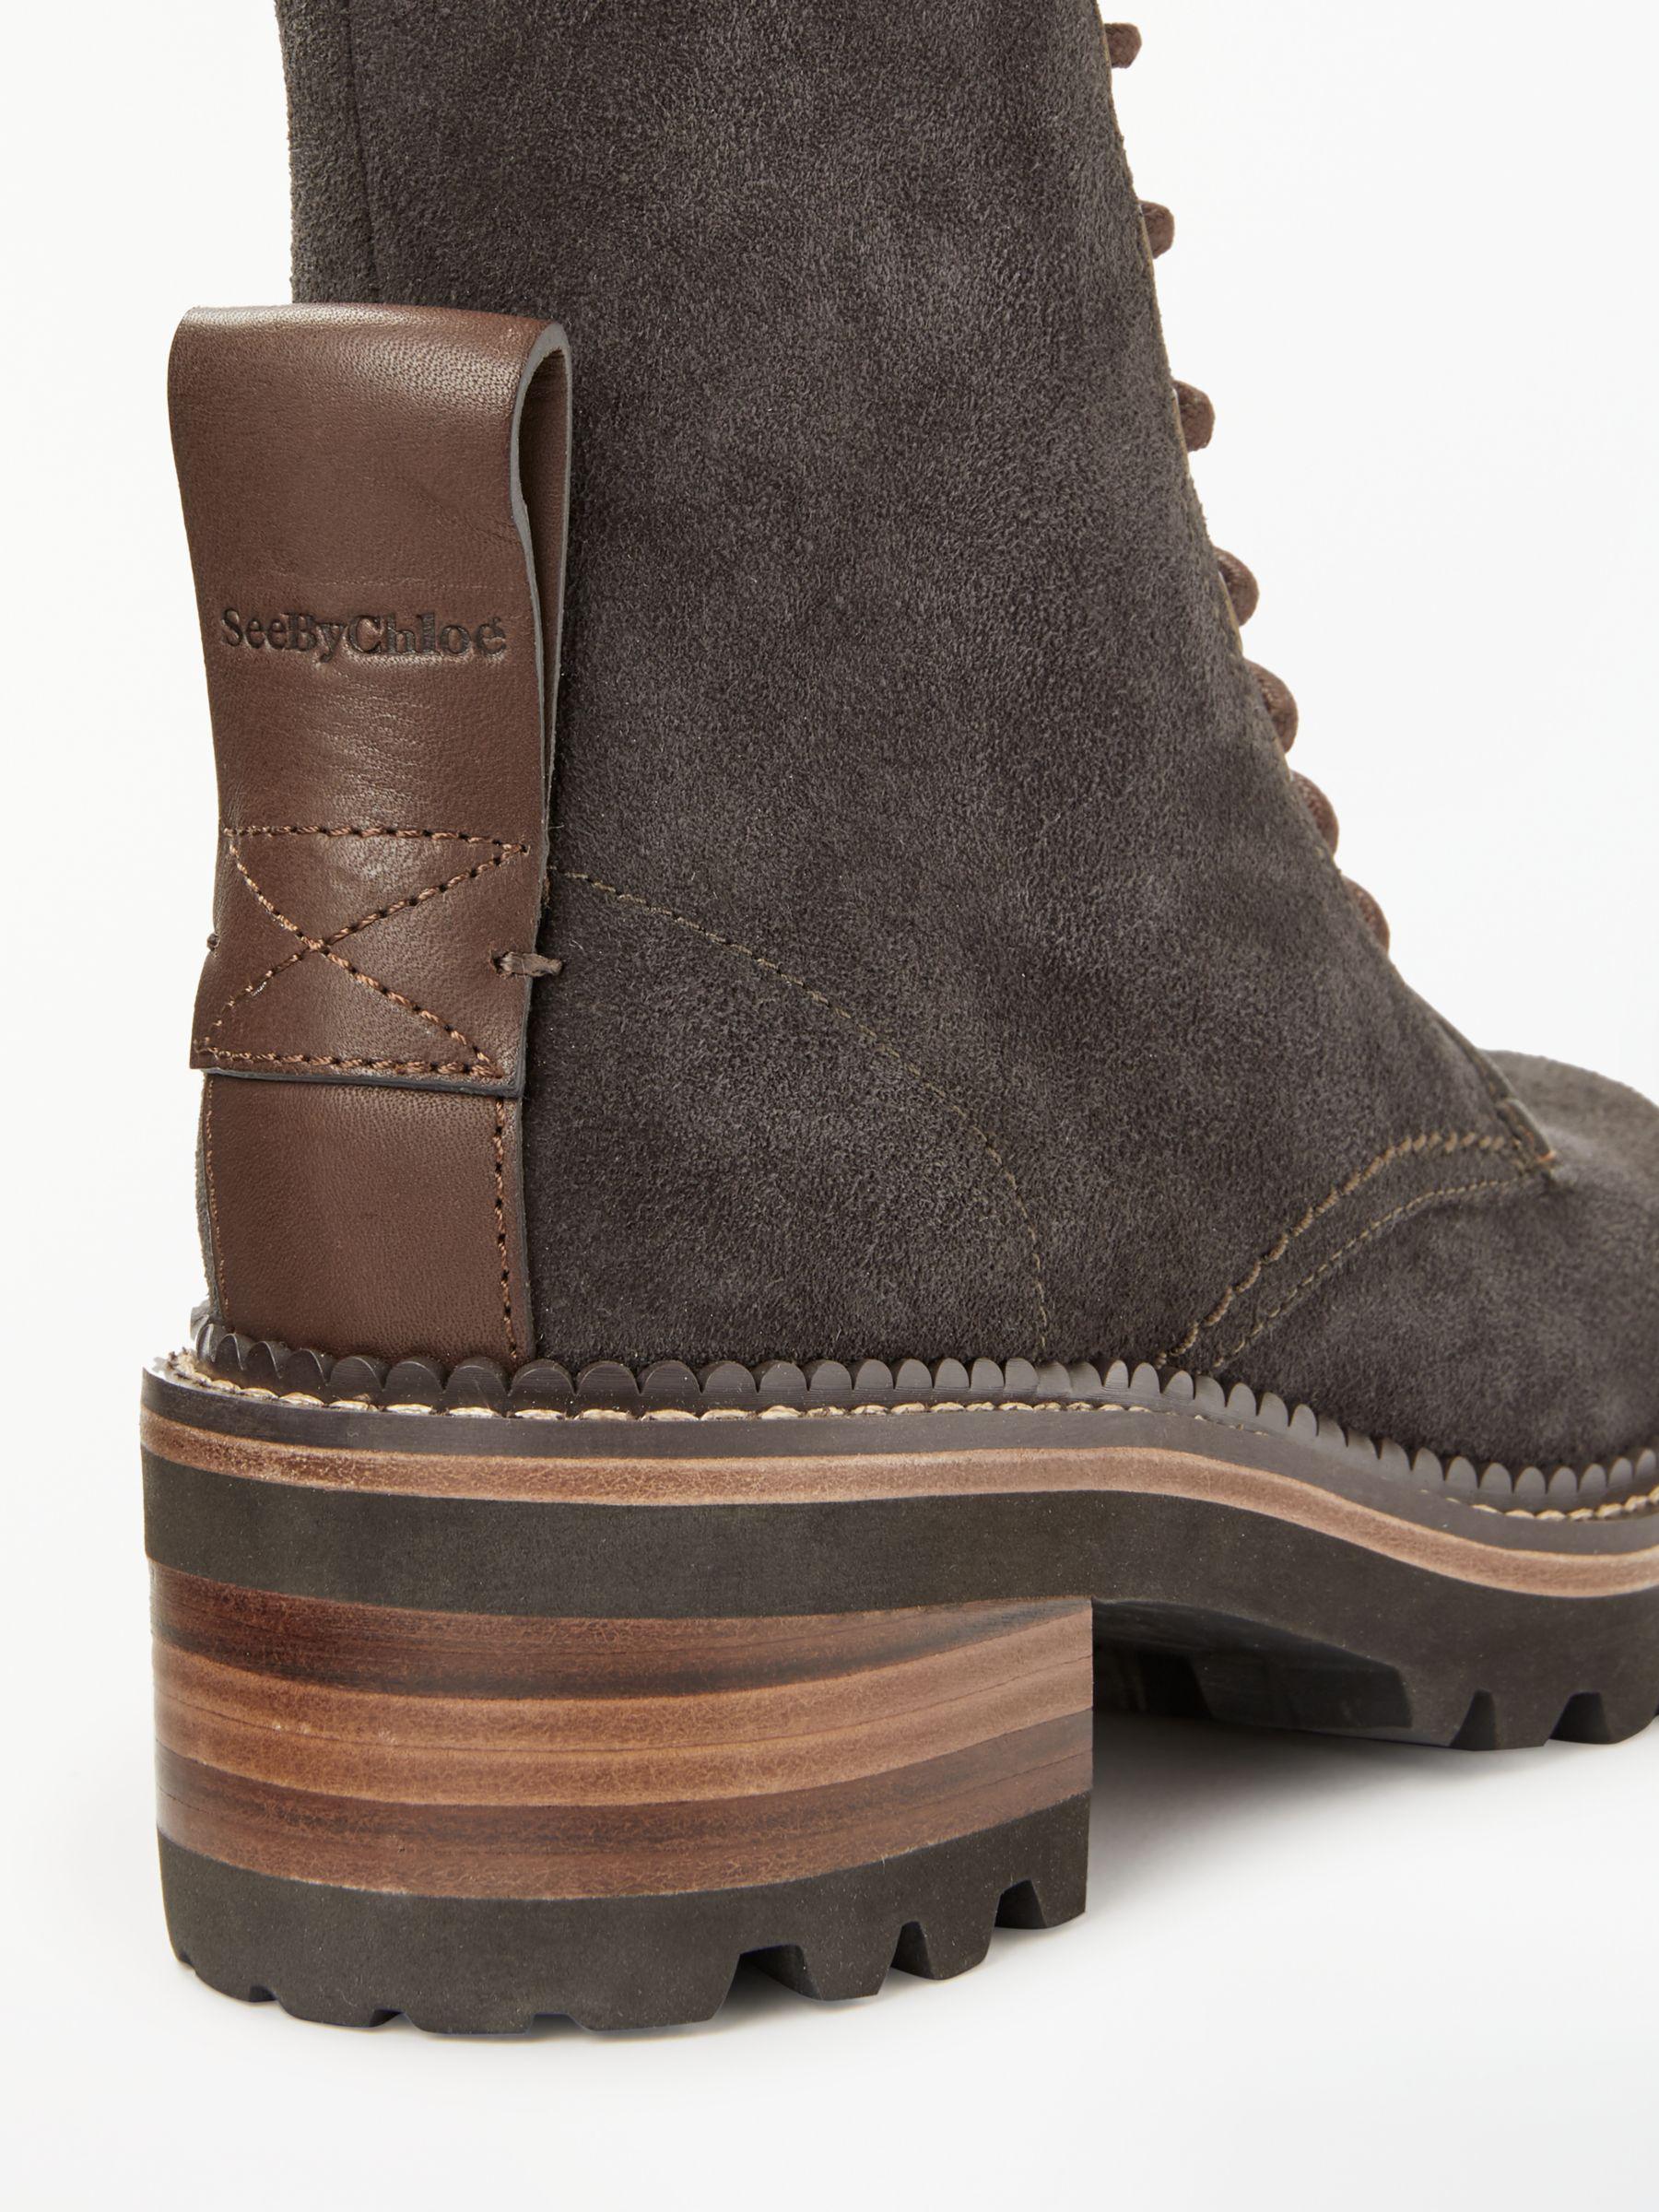 See By Chloé Mozart Suede Lace-up Ankle Boots in Dark Grey (Grey) - Lyst